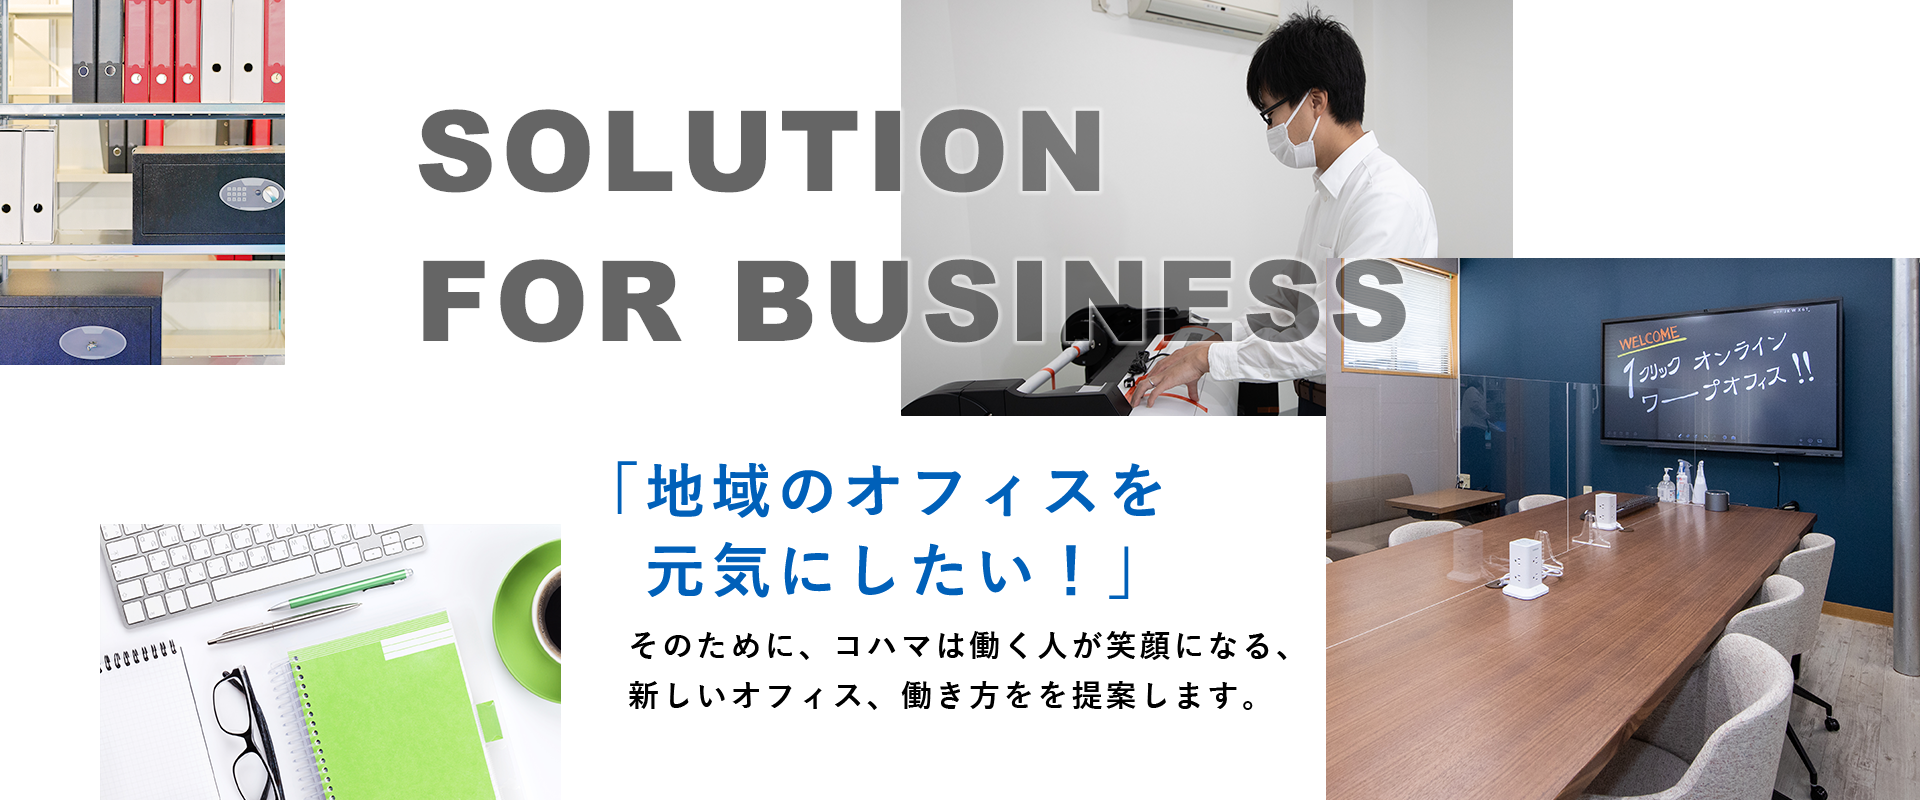 SOLUTION FOR BUSINESS